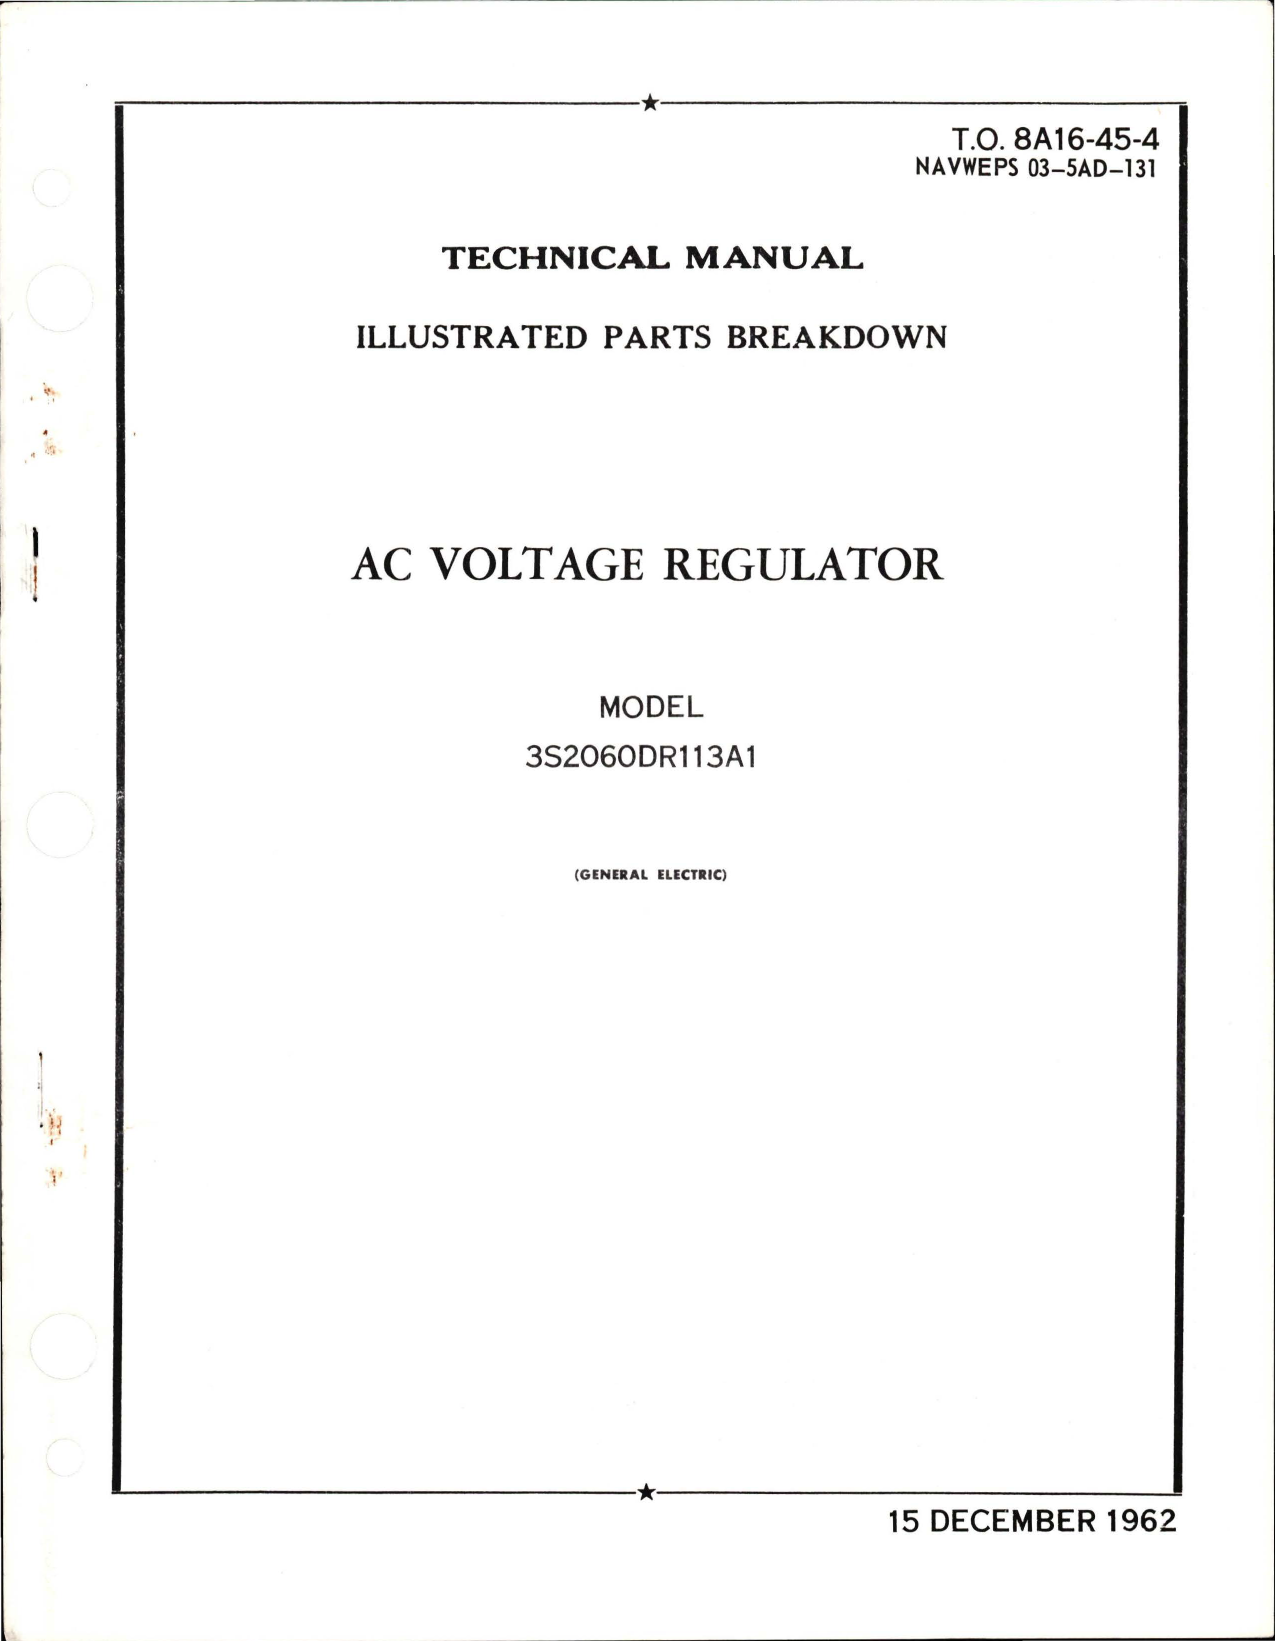 Sample page 1 from AirCorps Library document: Illustrated Parts Breakdown for AC Voltage Regulator - Model 3S2060DR113A1